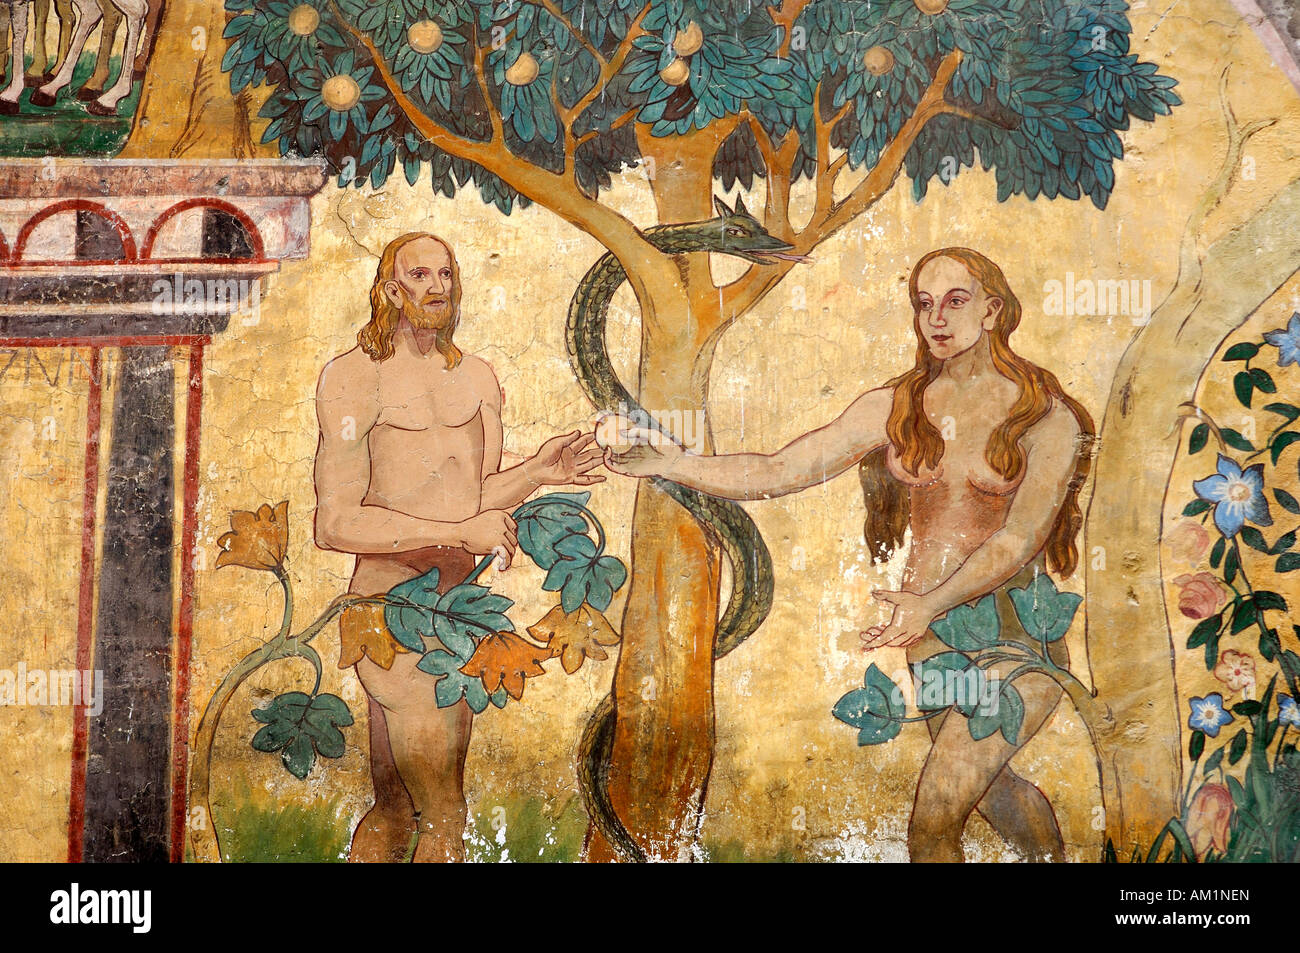 Adam And Eve In The Garden Of Eden Sgraffito Outdoor Wall Painting Stock Photo Alamy